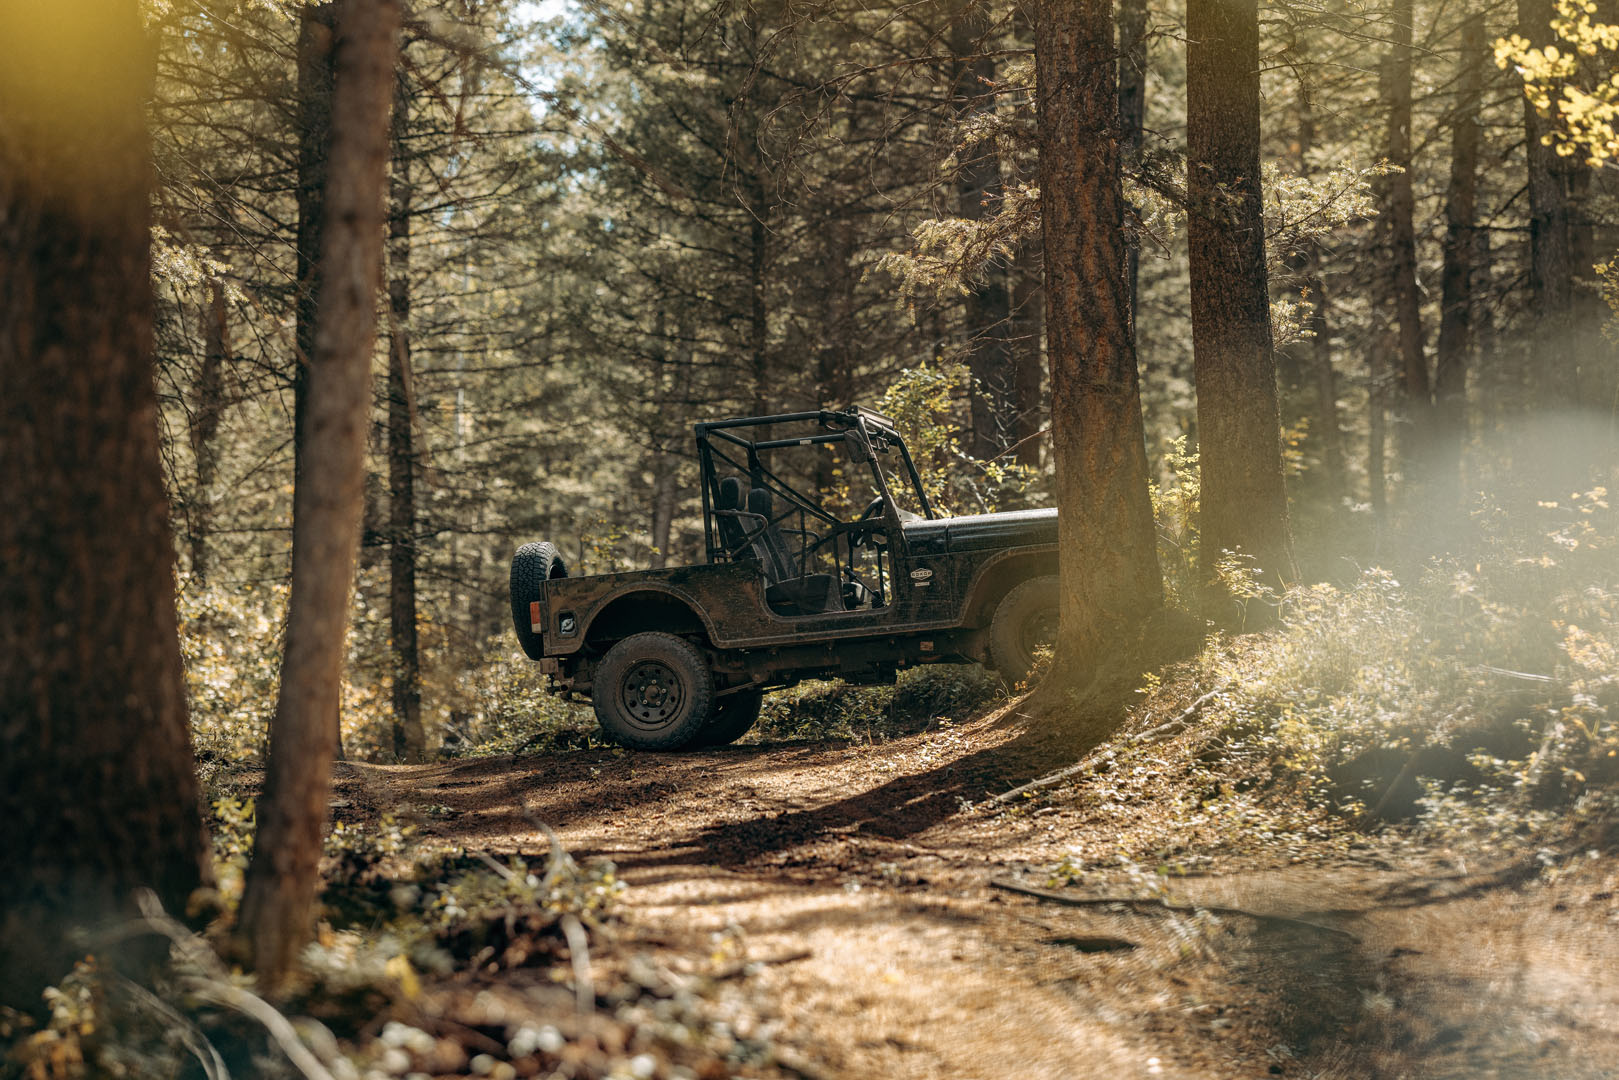 Why choose ROXOR for your next adventure? Off-roading side-by-side.